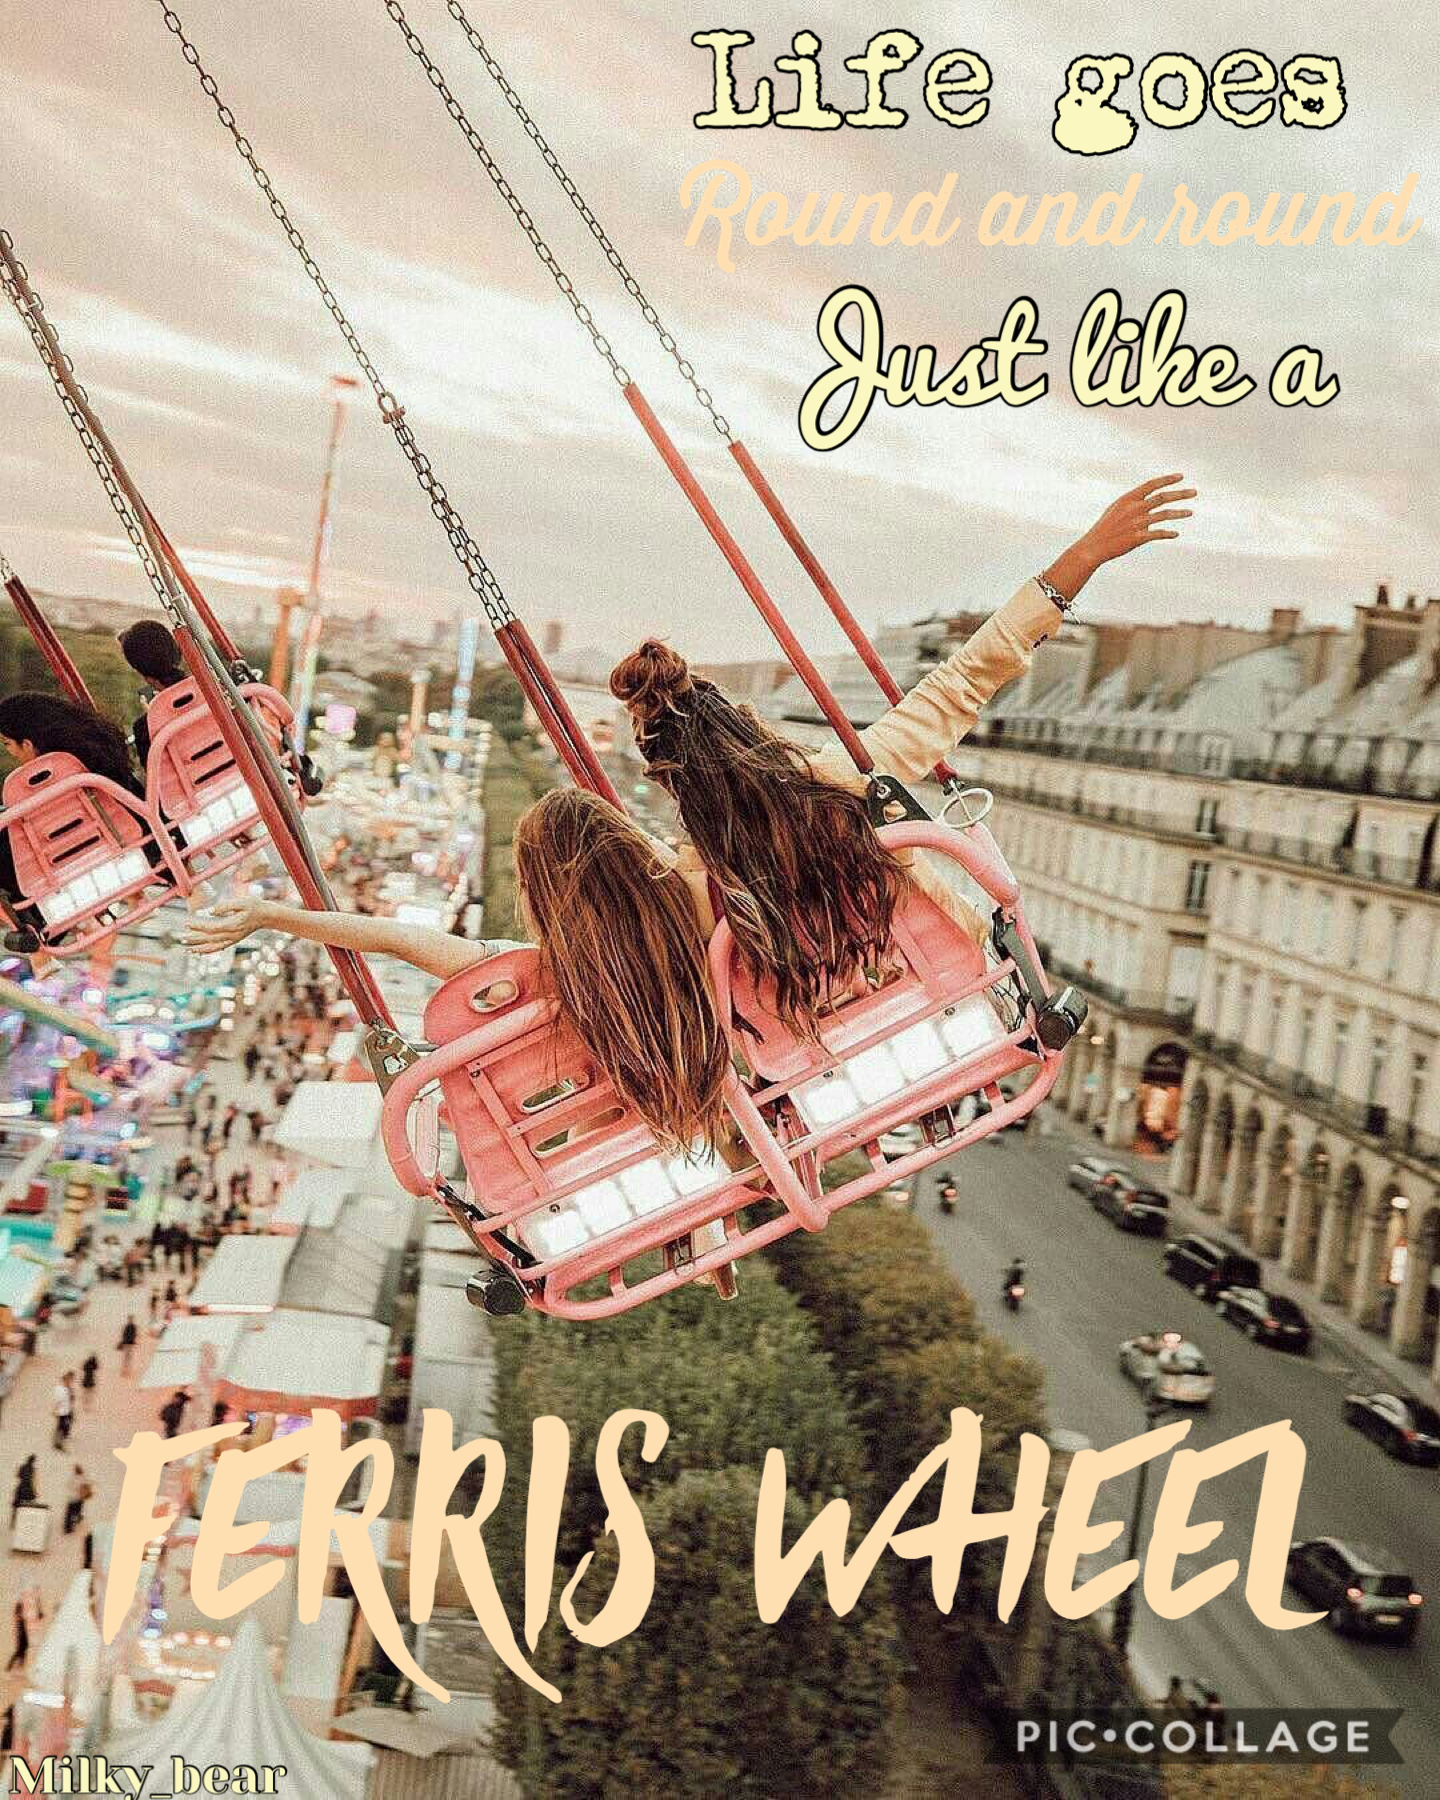 🎡 TAP 🎡 
“Life goes round and round just like a Ferris wheel”